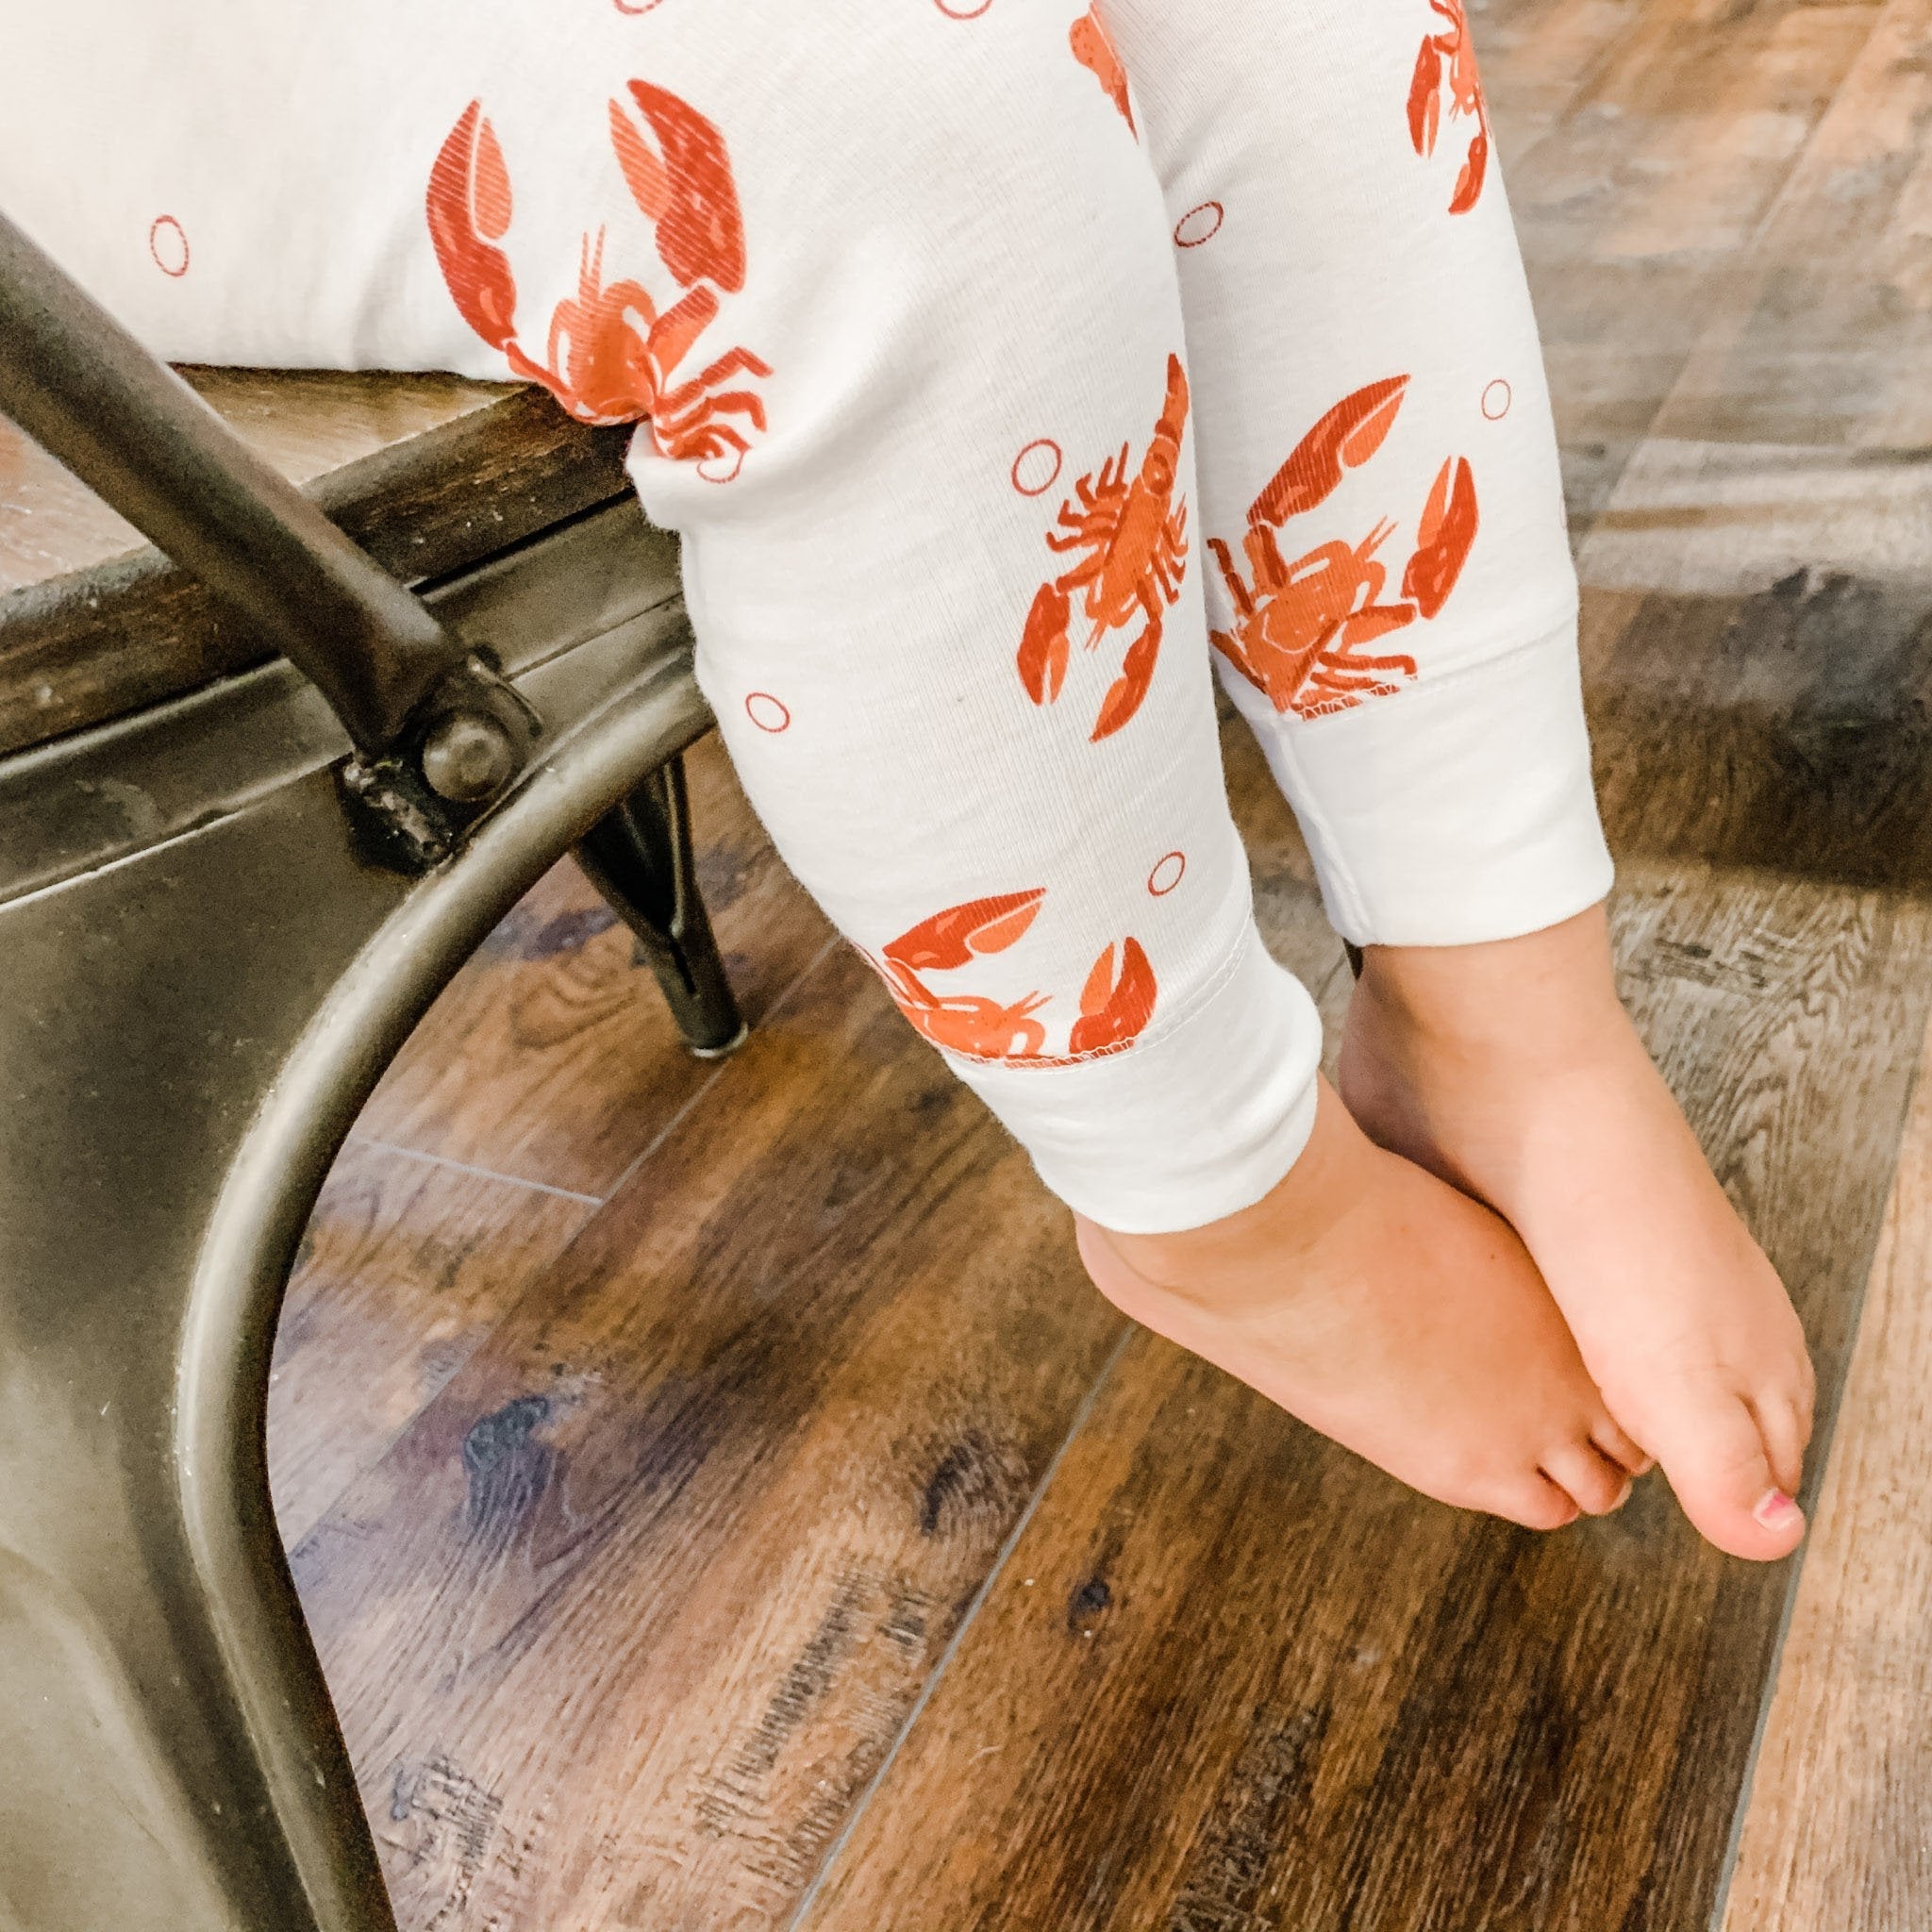 Heads or Tails Lobster Crawfish Pajamas by Little Hometown